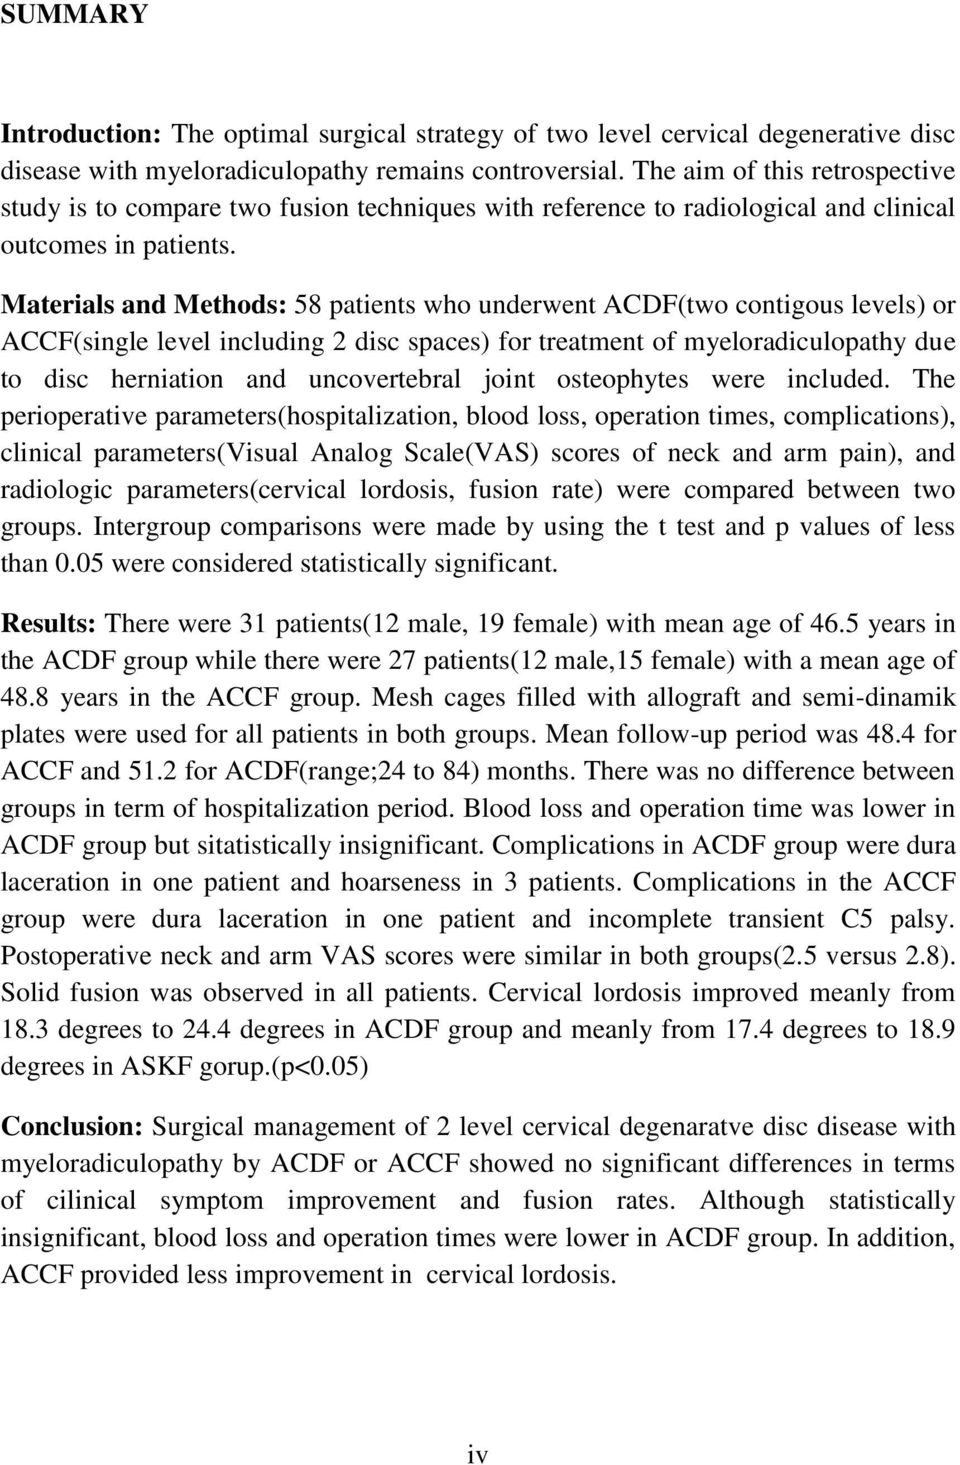 Materials and Methods: 58 patients who underwent ACDF(two contigous levels) or ACCF(single level including 2 disc spaces) for treatment of myeloradiculopathy due to disc herniation and uncovertebral